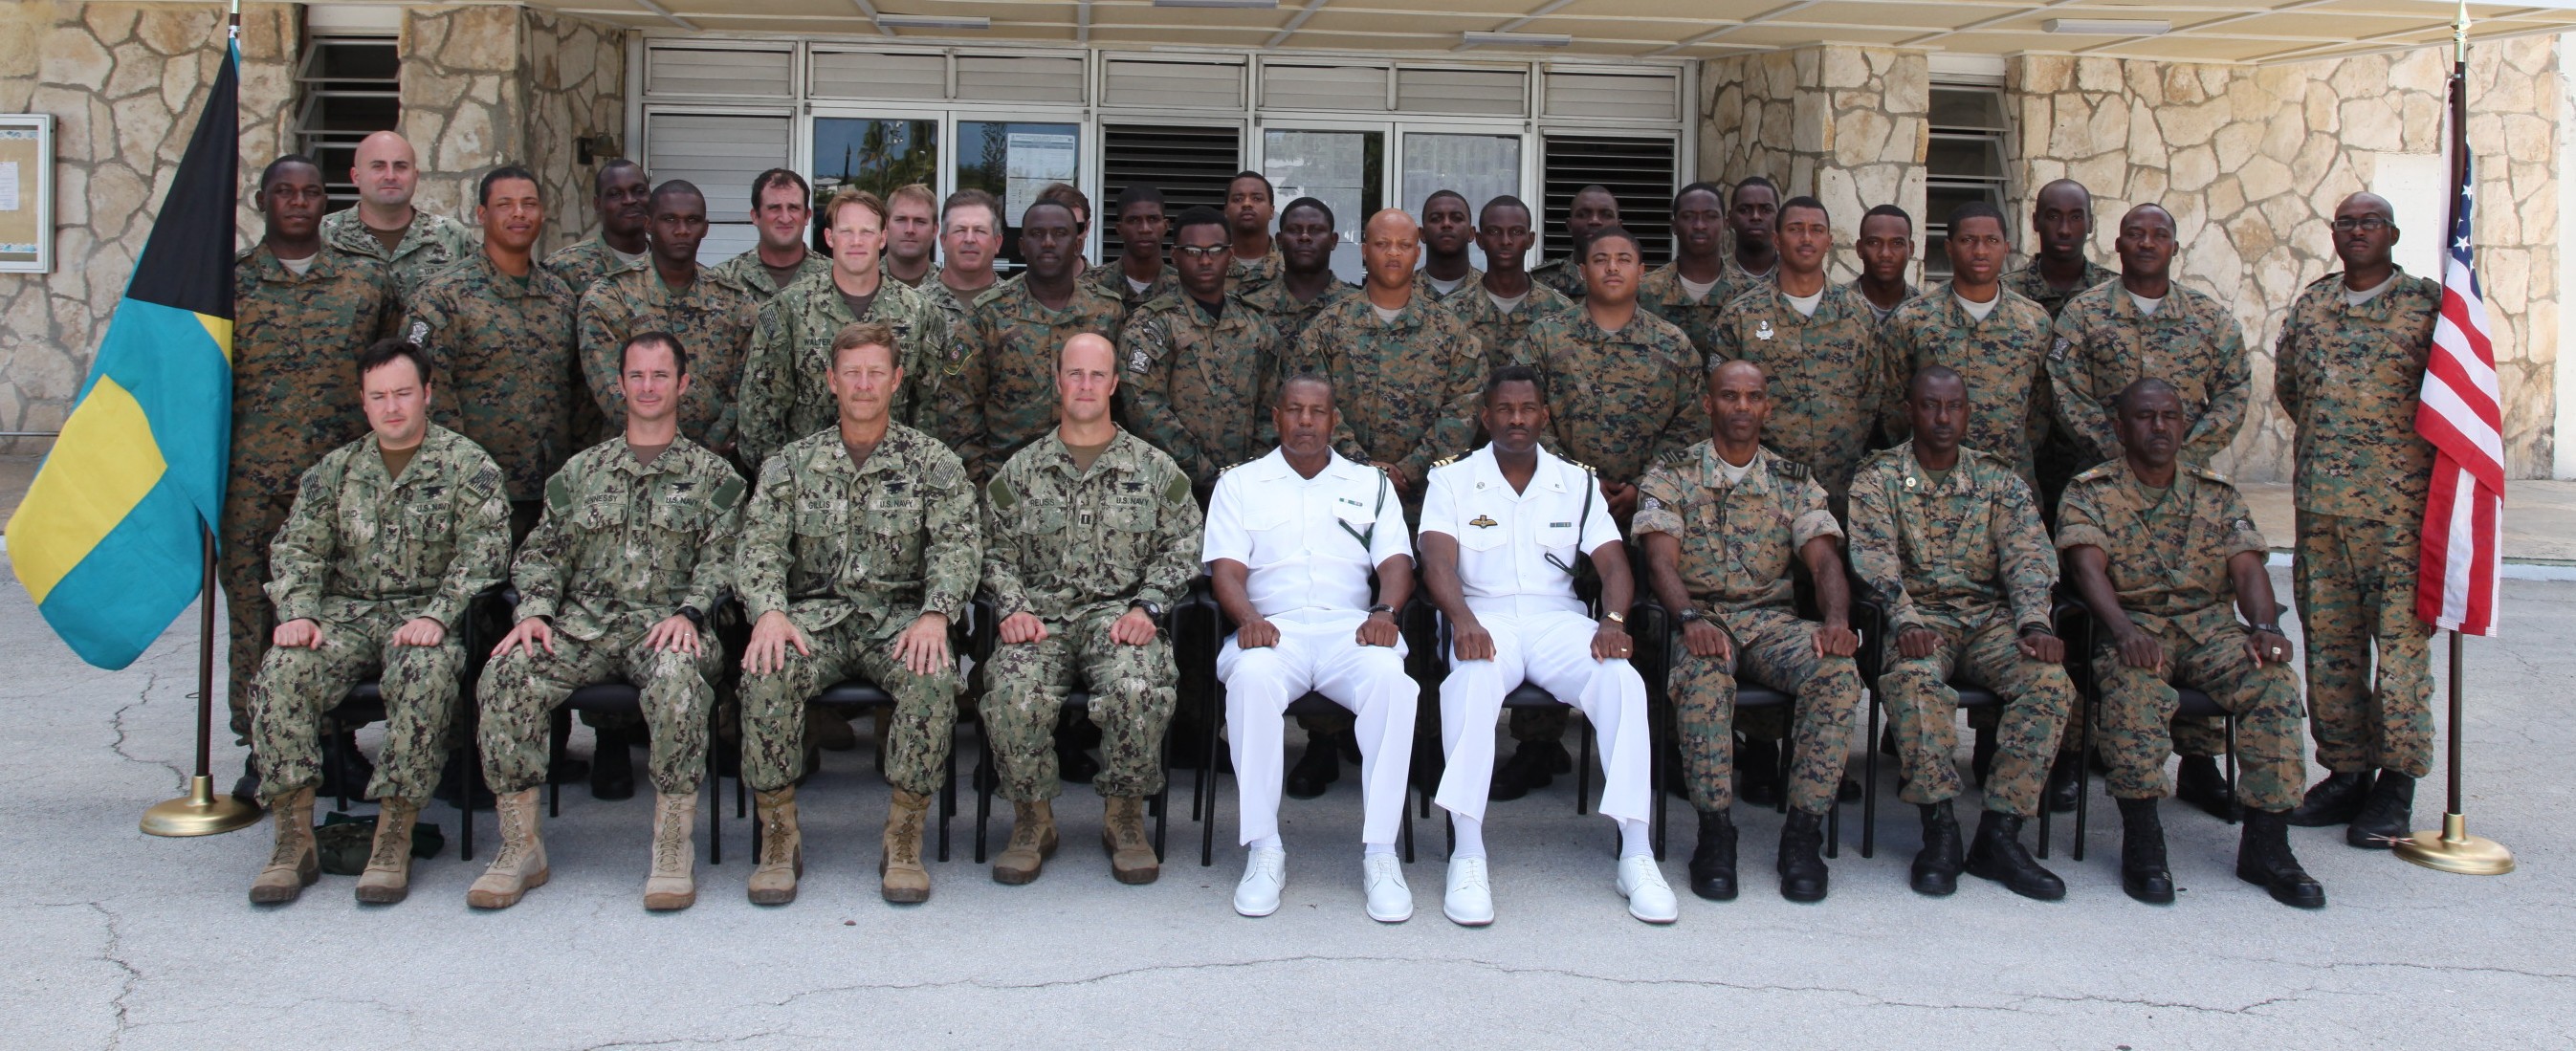 SPECIAL OPERATIONS COMMAND (SOCNORTH) NORTH JOINT COMBINED EXERCISE TRAINING (JCET) GRADUATION